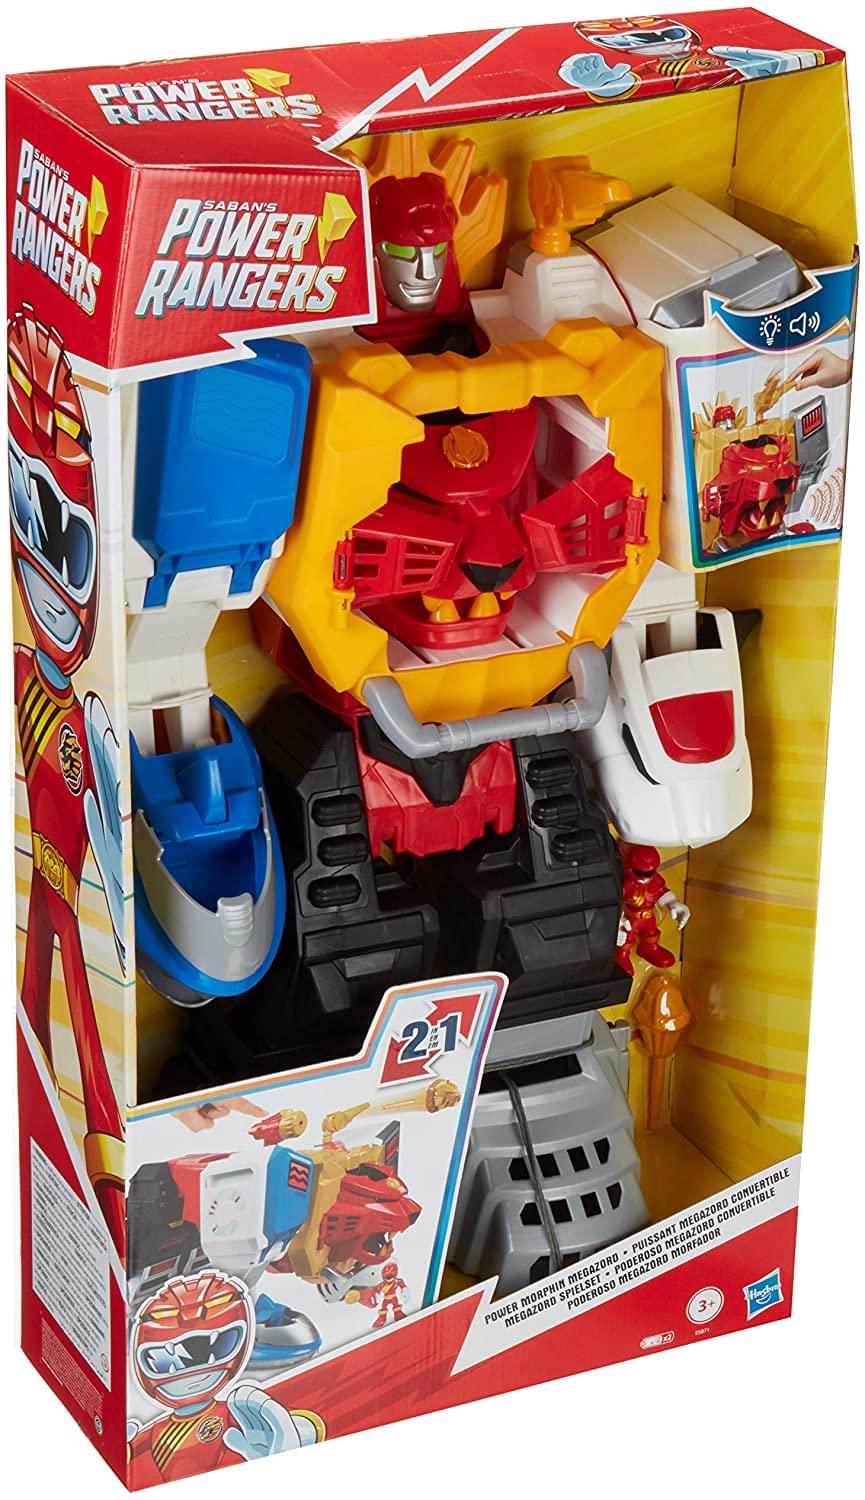 Power Rangers Electronic Power Morphin Megazord | 2-in-1 Converting Playset